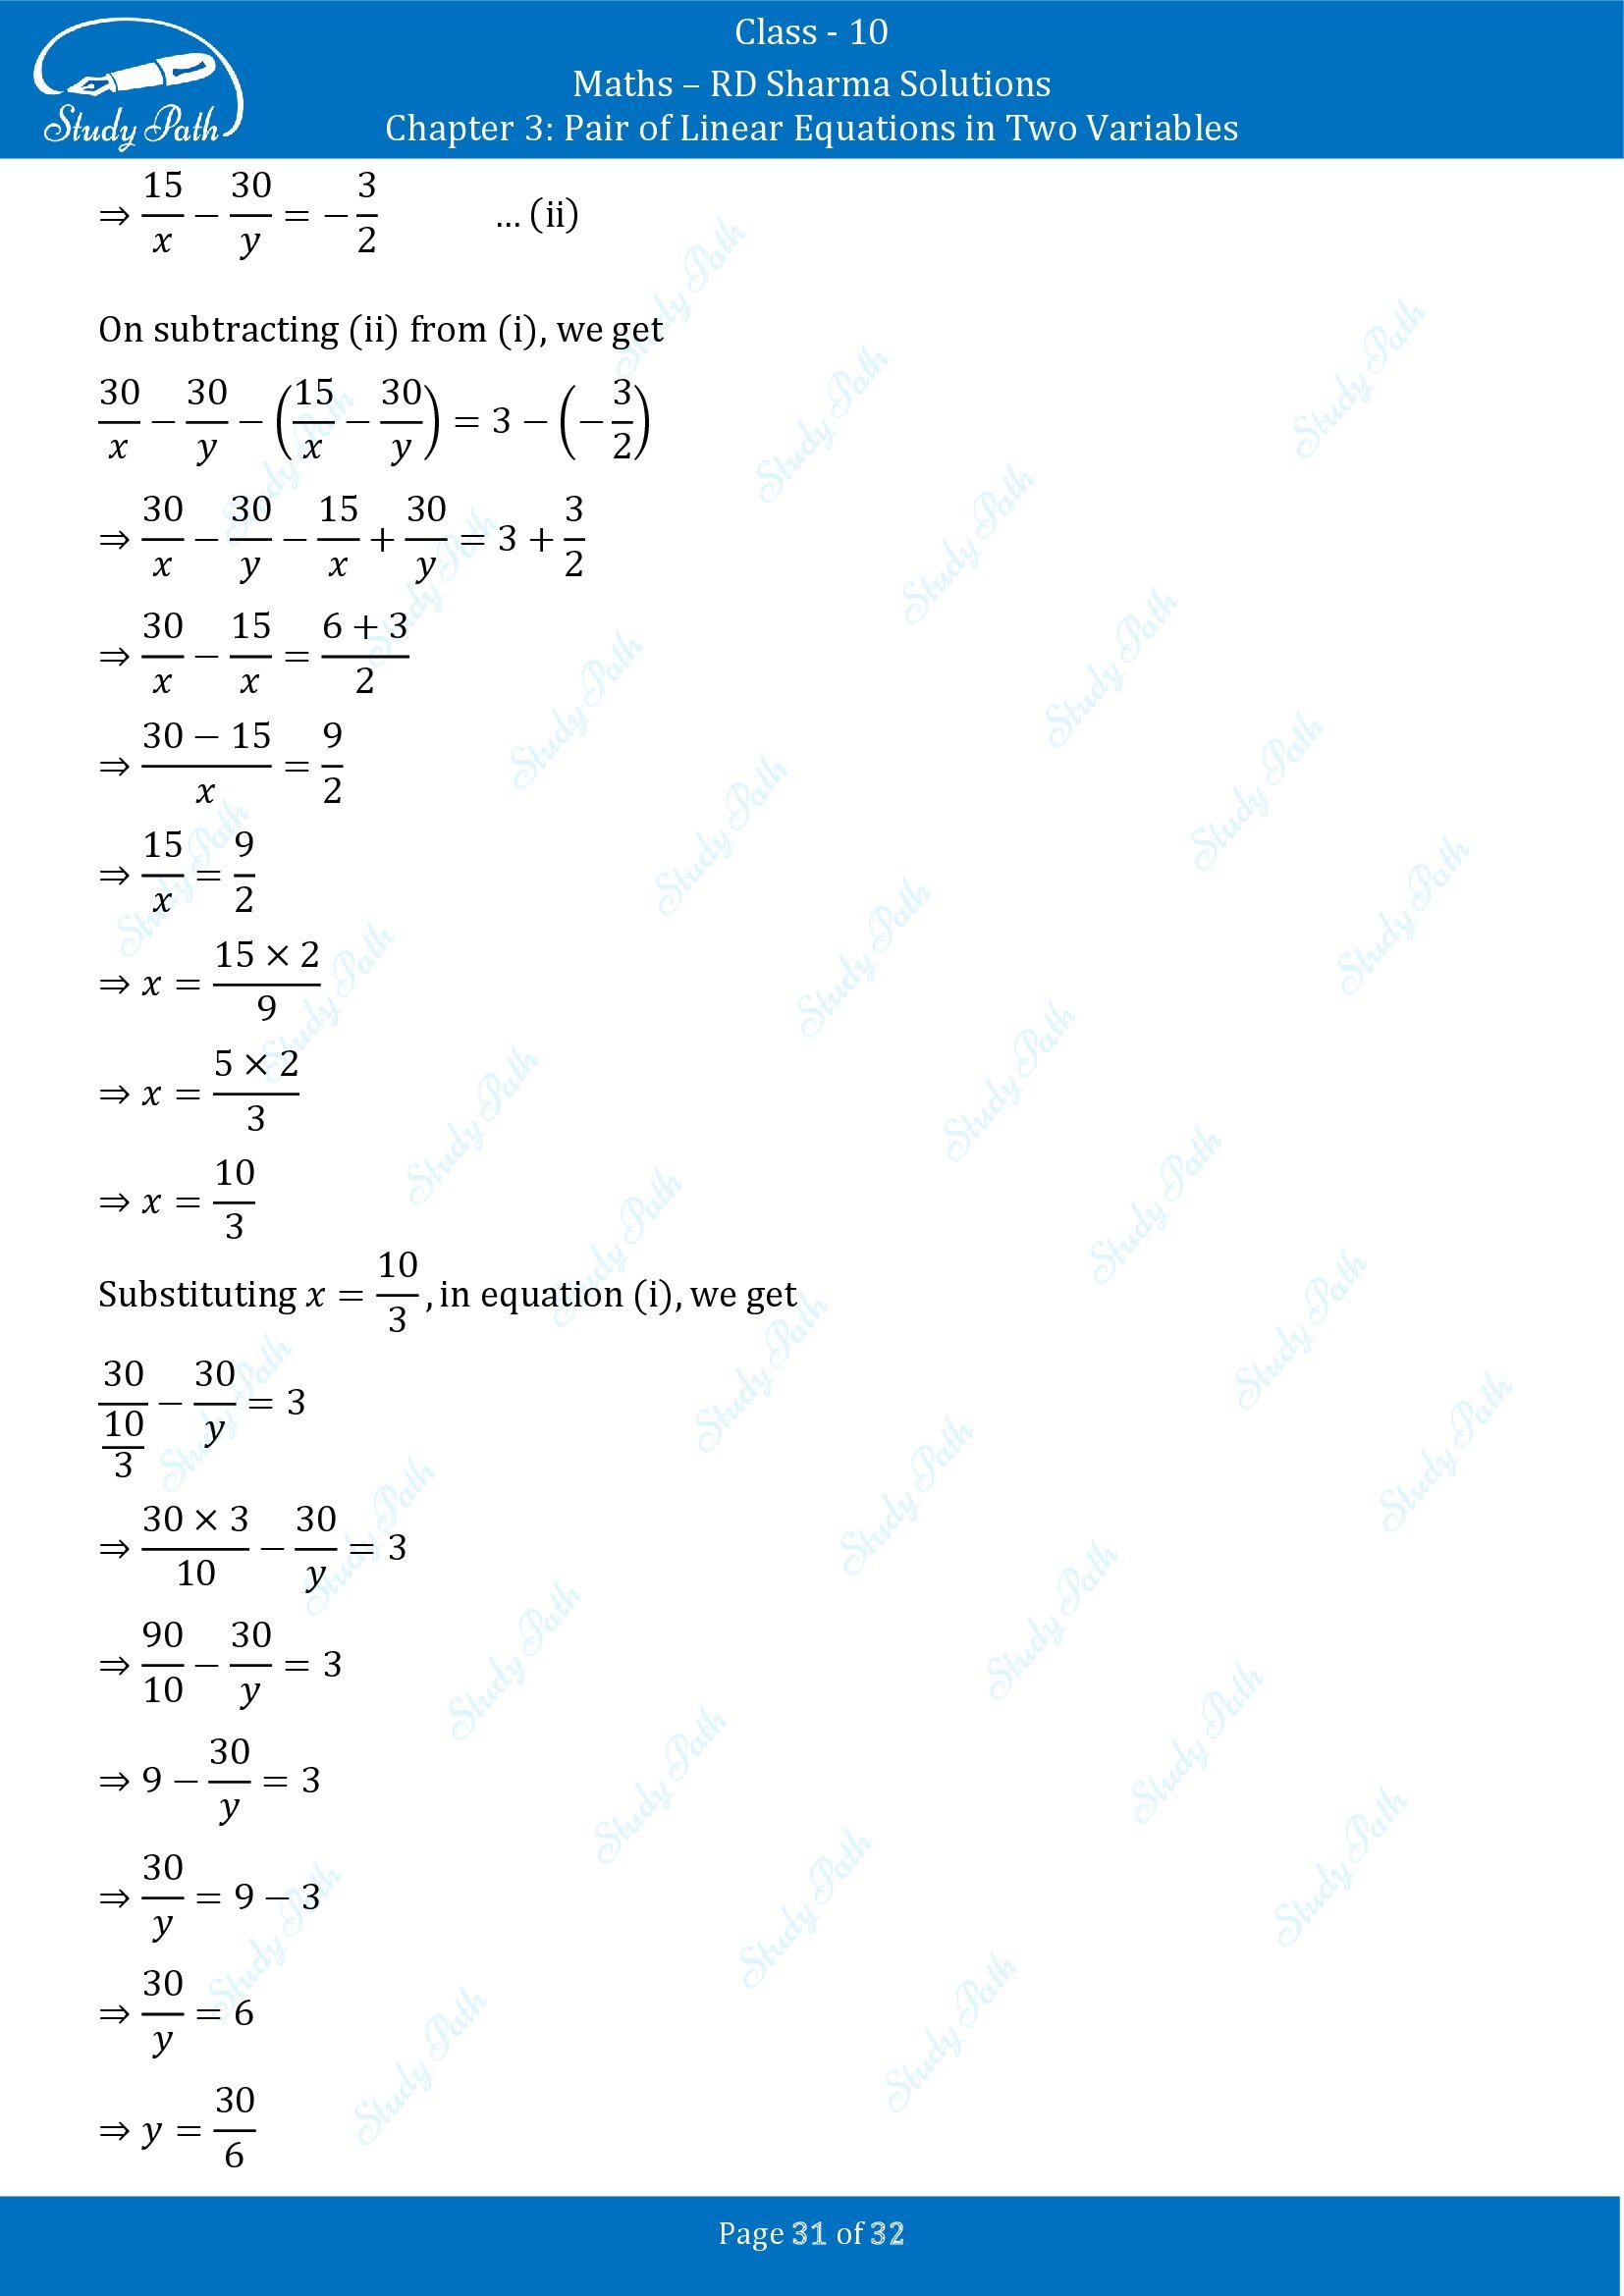 RD Sharma Solutions Class 10 Chapter 3 Pair of Linear Equations in Two Variables Exercise 3.10 00031